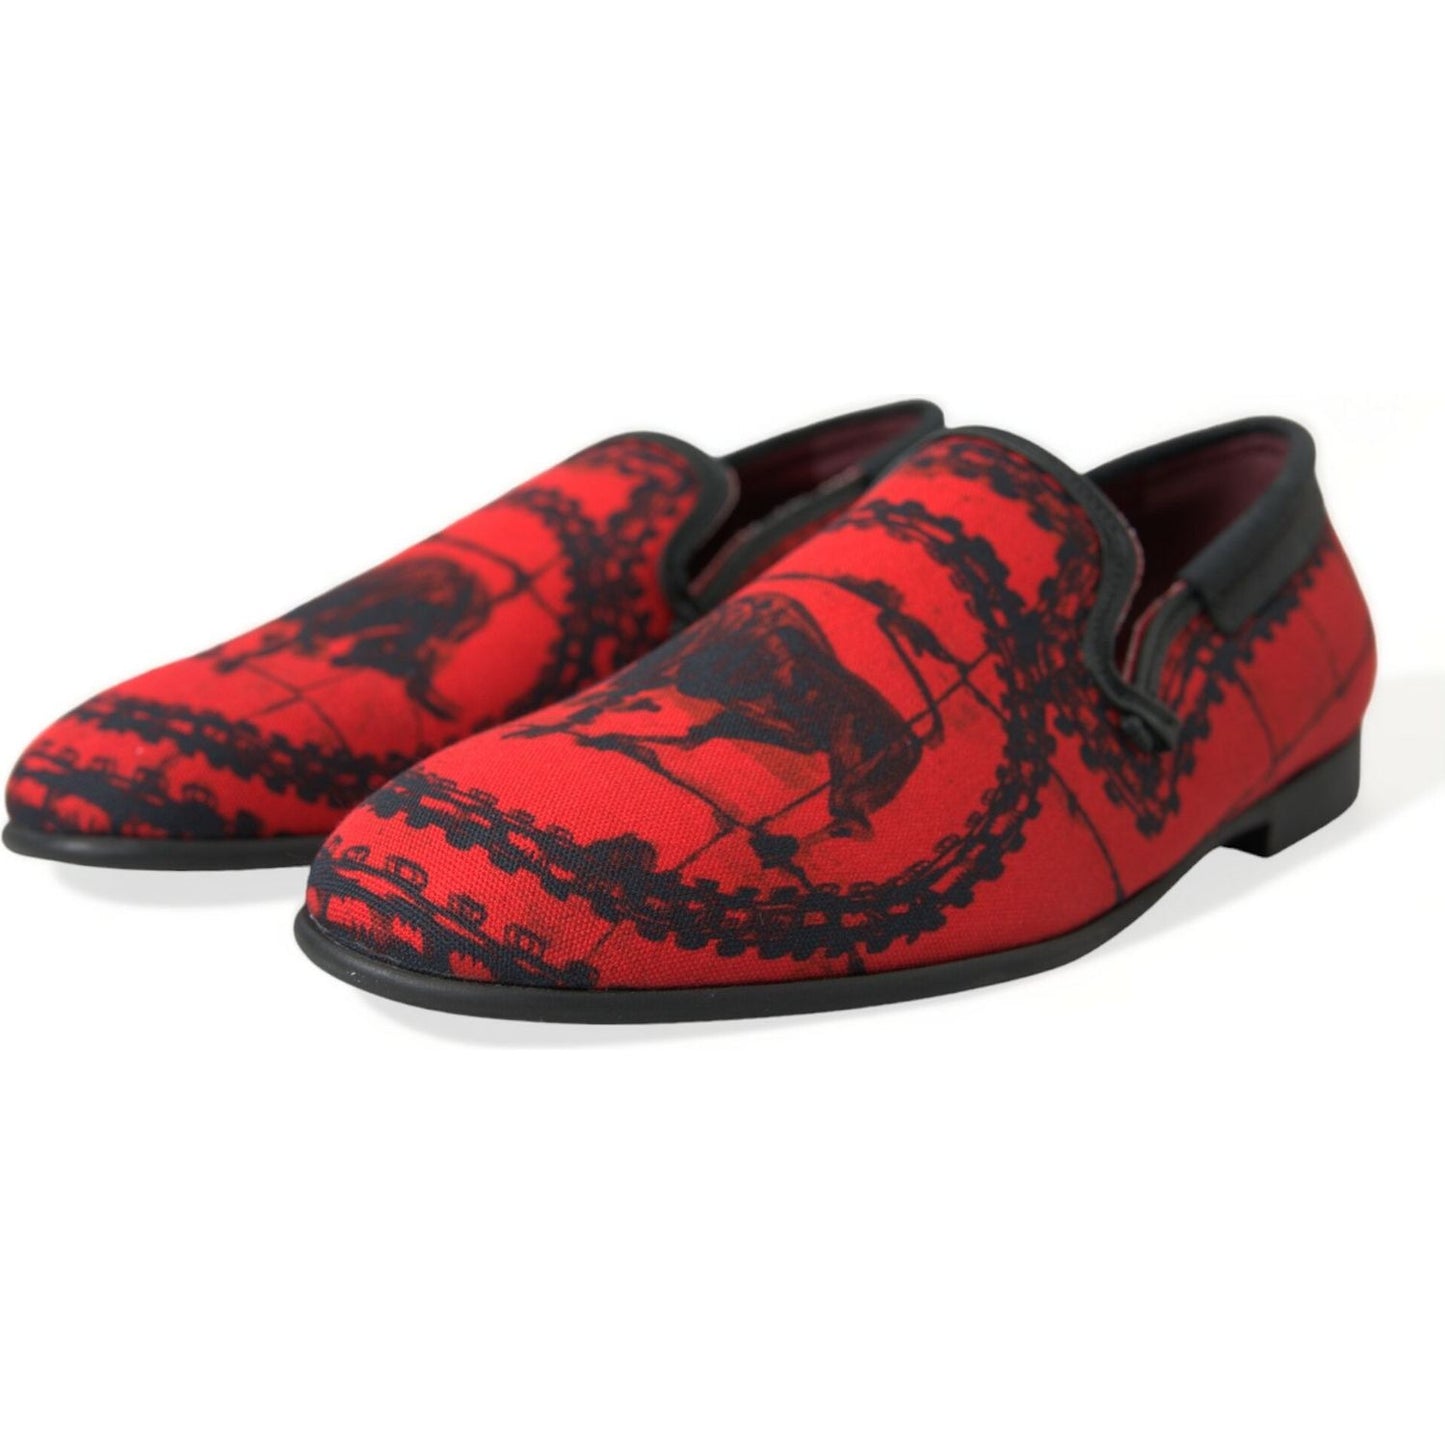 Torero-Inspired Luxe Red & Black Loafers